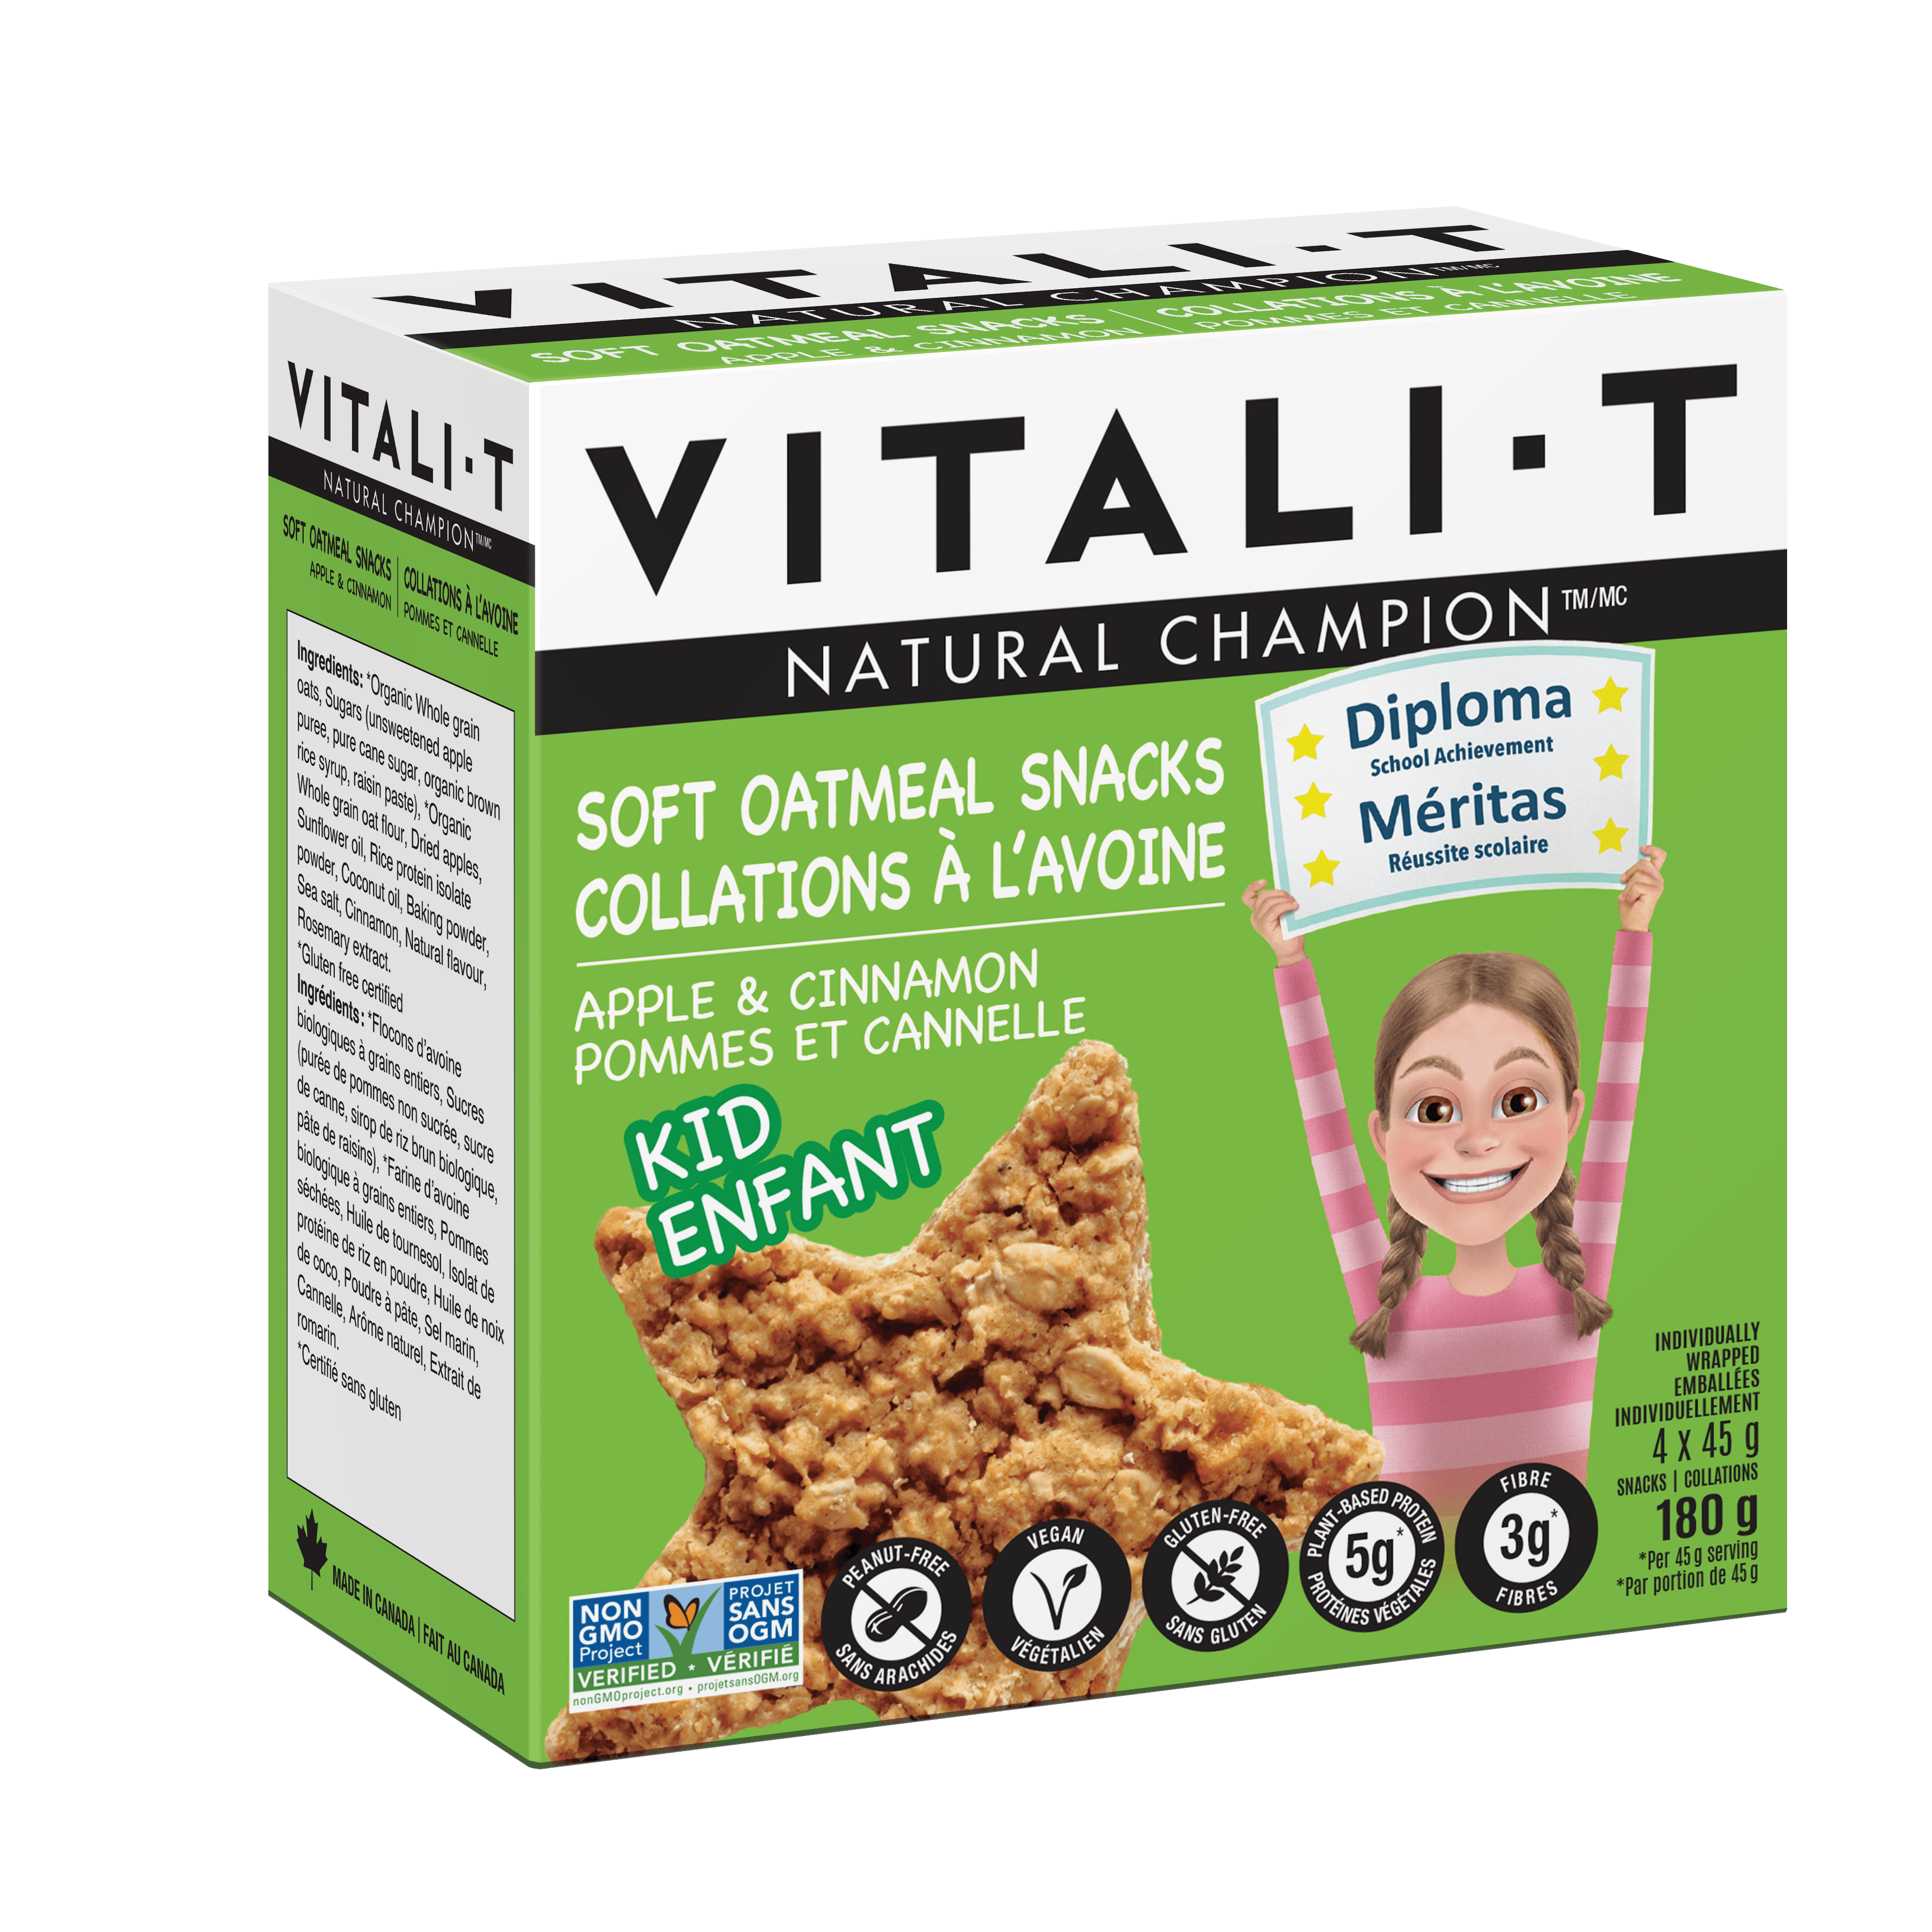 COLLATION POMMES ET CANNELLE 4x45G - Vitali-T Snacks/Collations